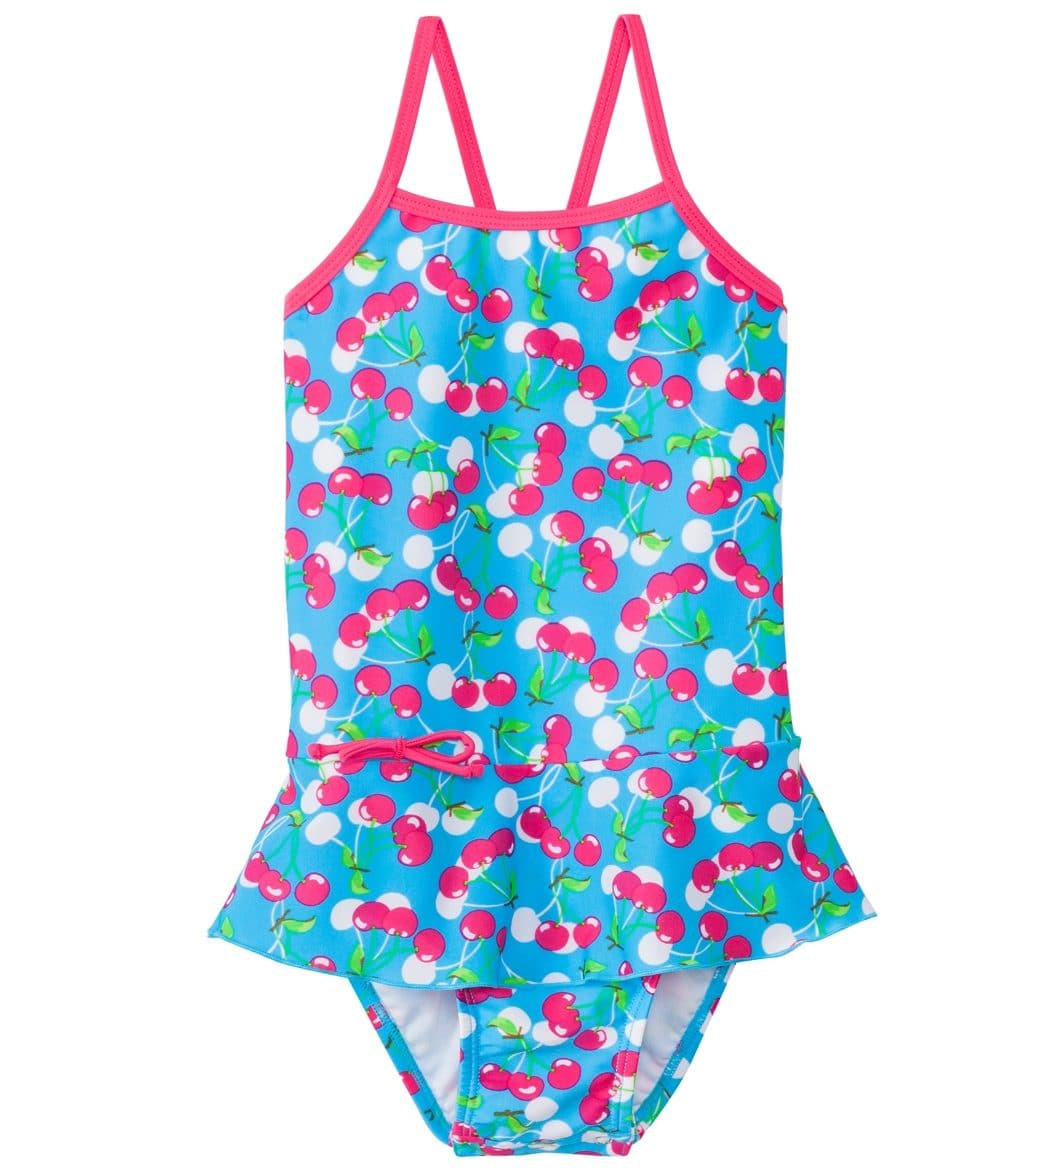 Snapme Girls' Very Cherry Skirted Peplum One Piece Swimsuit Uvp 50+ 6 Months-8Yrs - 2T - Swimoutlet.com